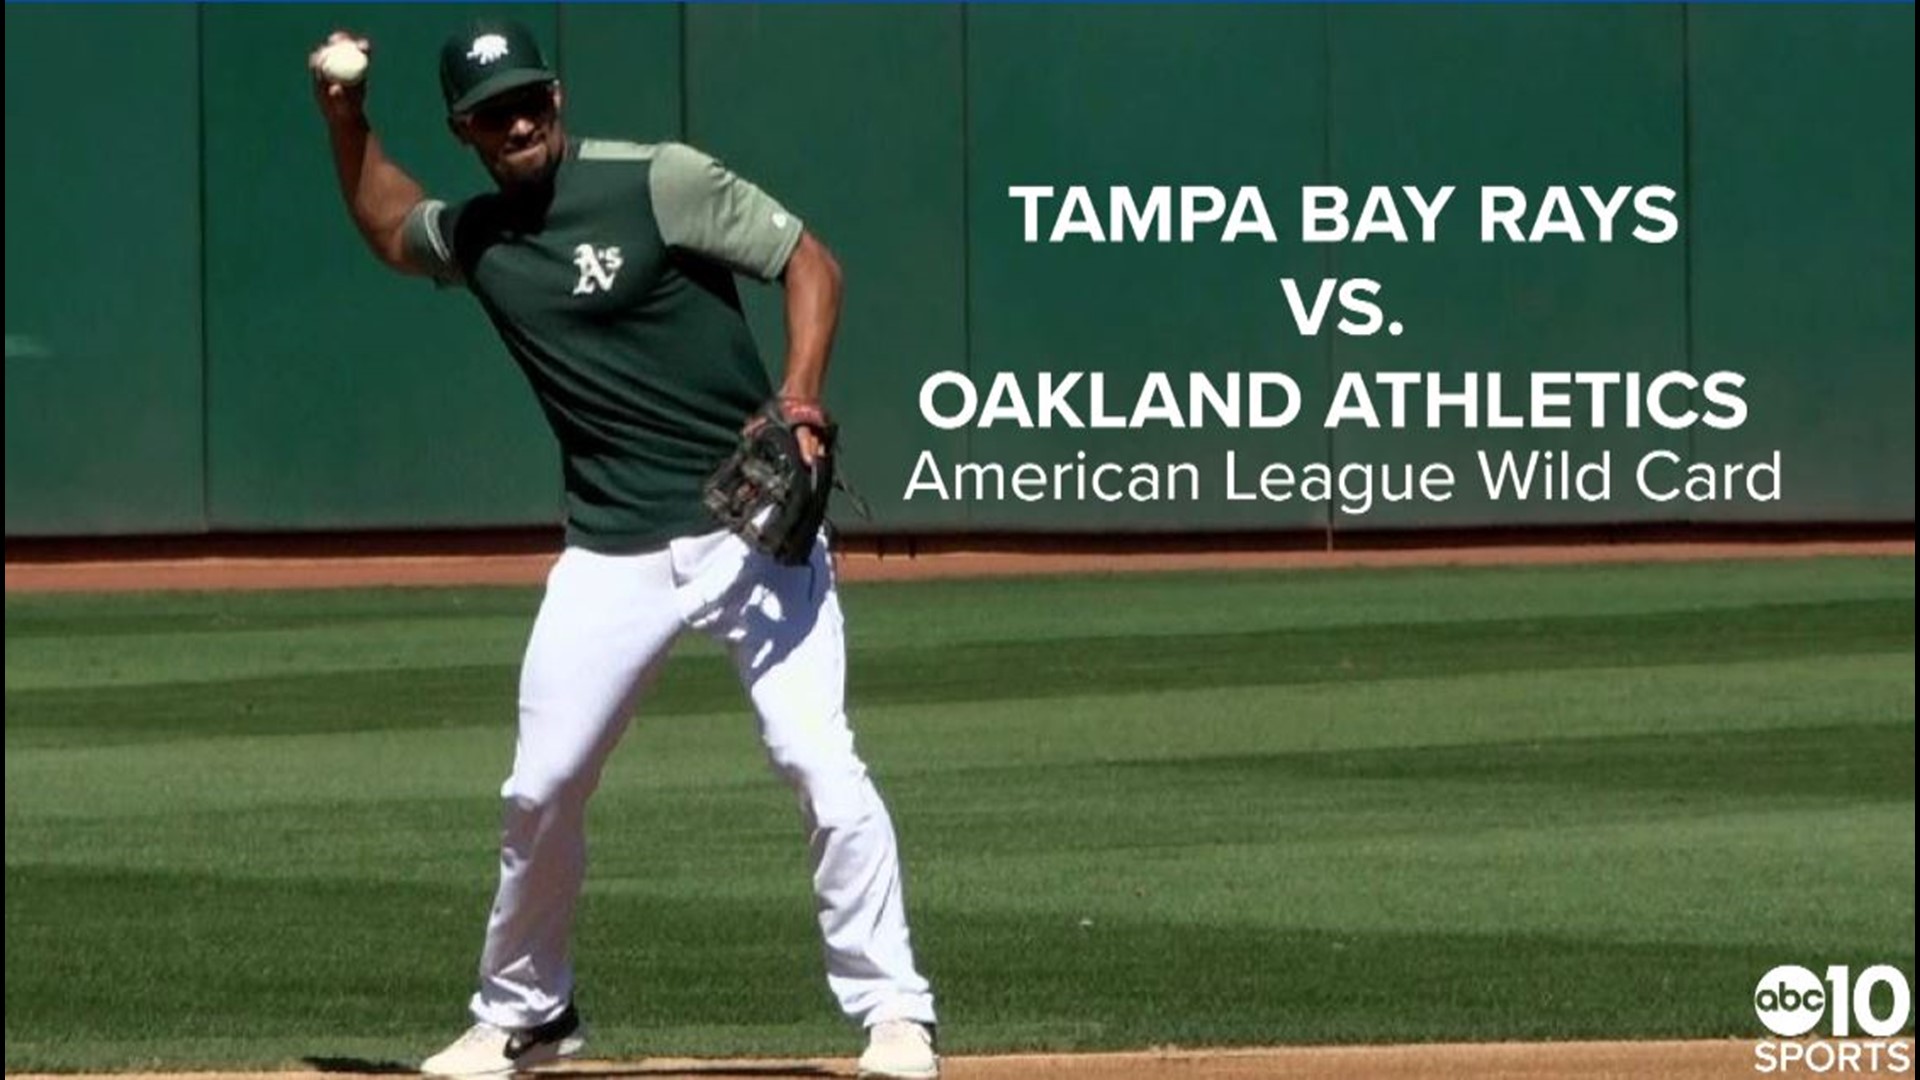 After being eliminated from the MLB Playoffs by the New York Yankees in the 2018 ALWC, the Oakland A's are preparing to host their first postseason test.